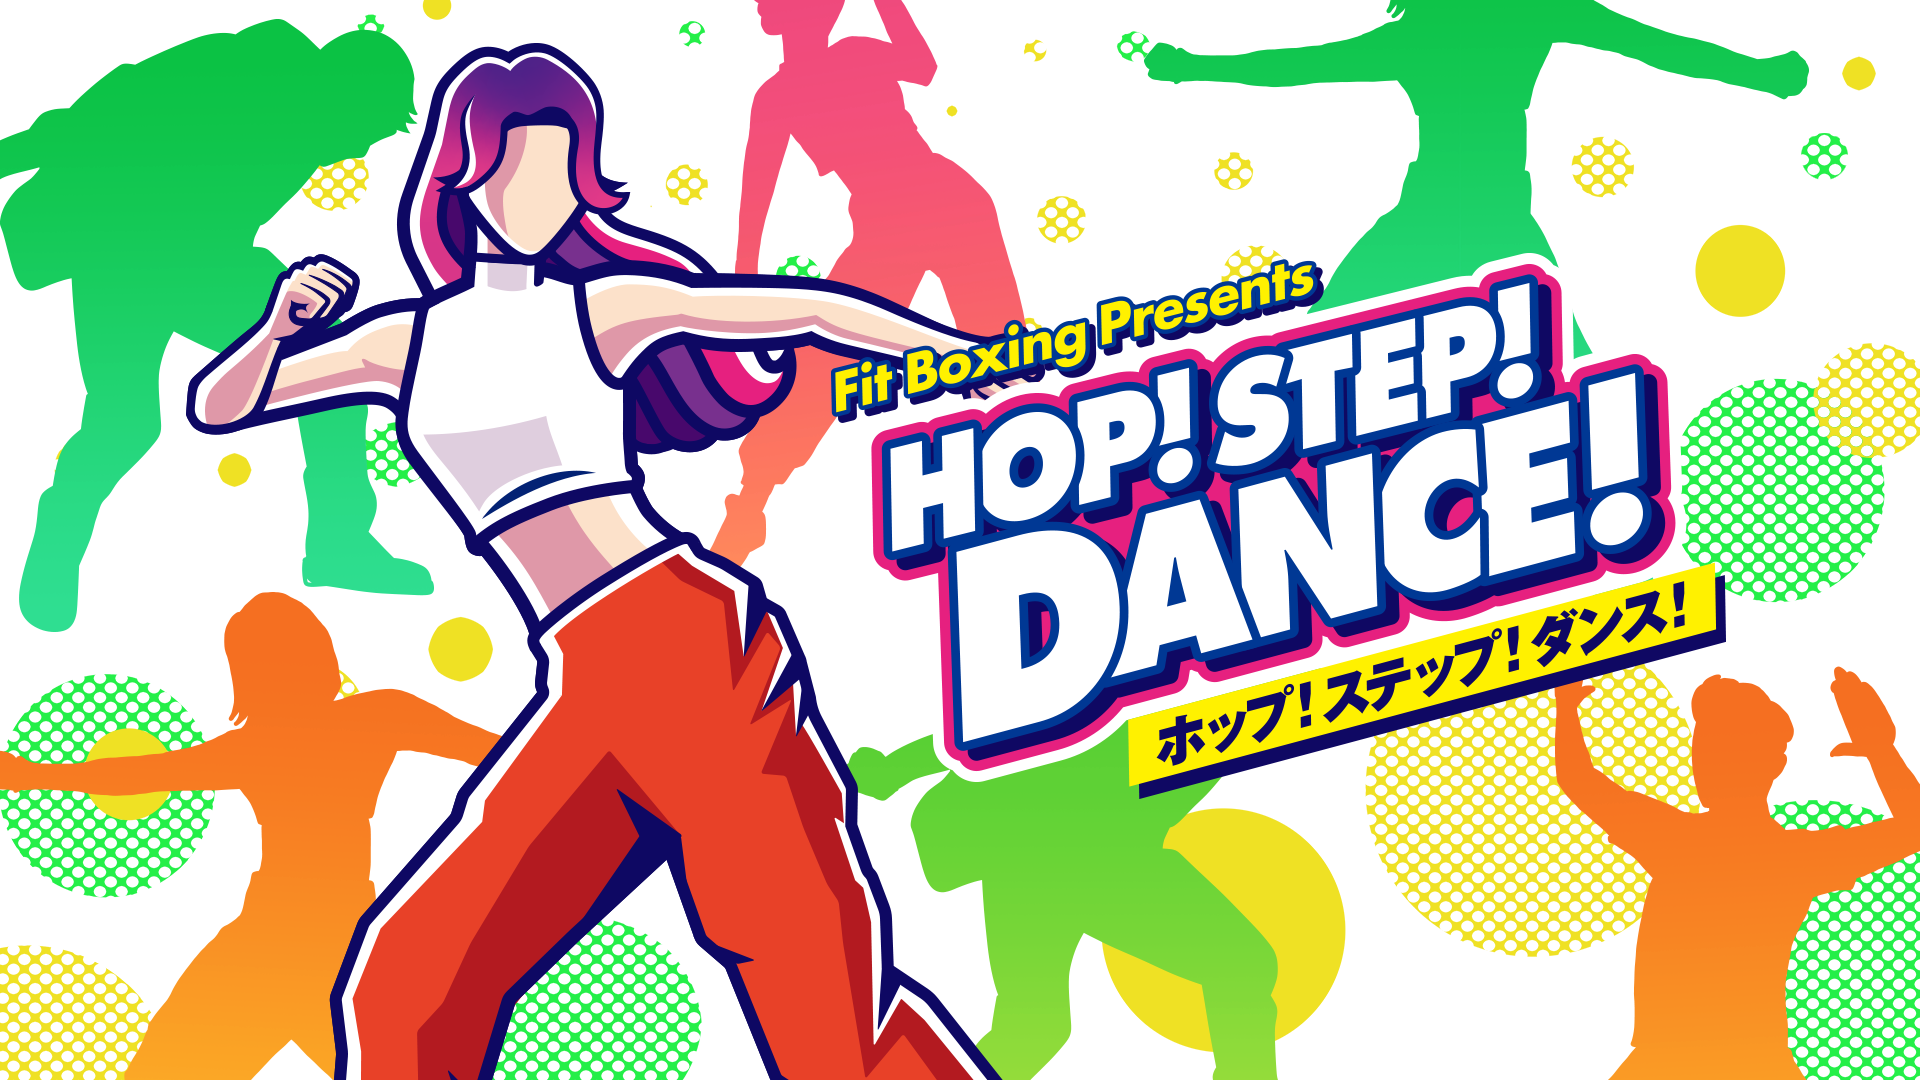 Nintendo Switch ソフトFit Boxing Presents「HOP! STEP! DANCE!」発売のお知らせ1